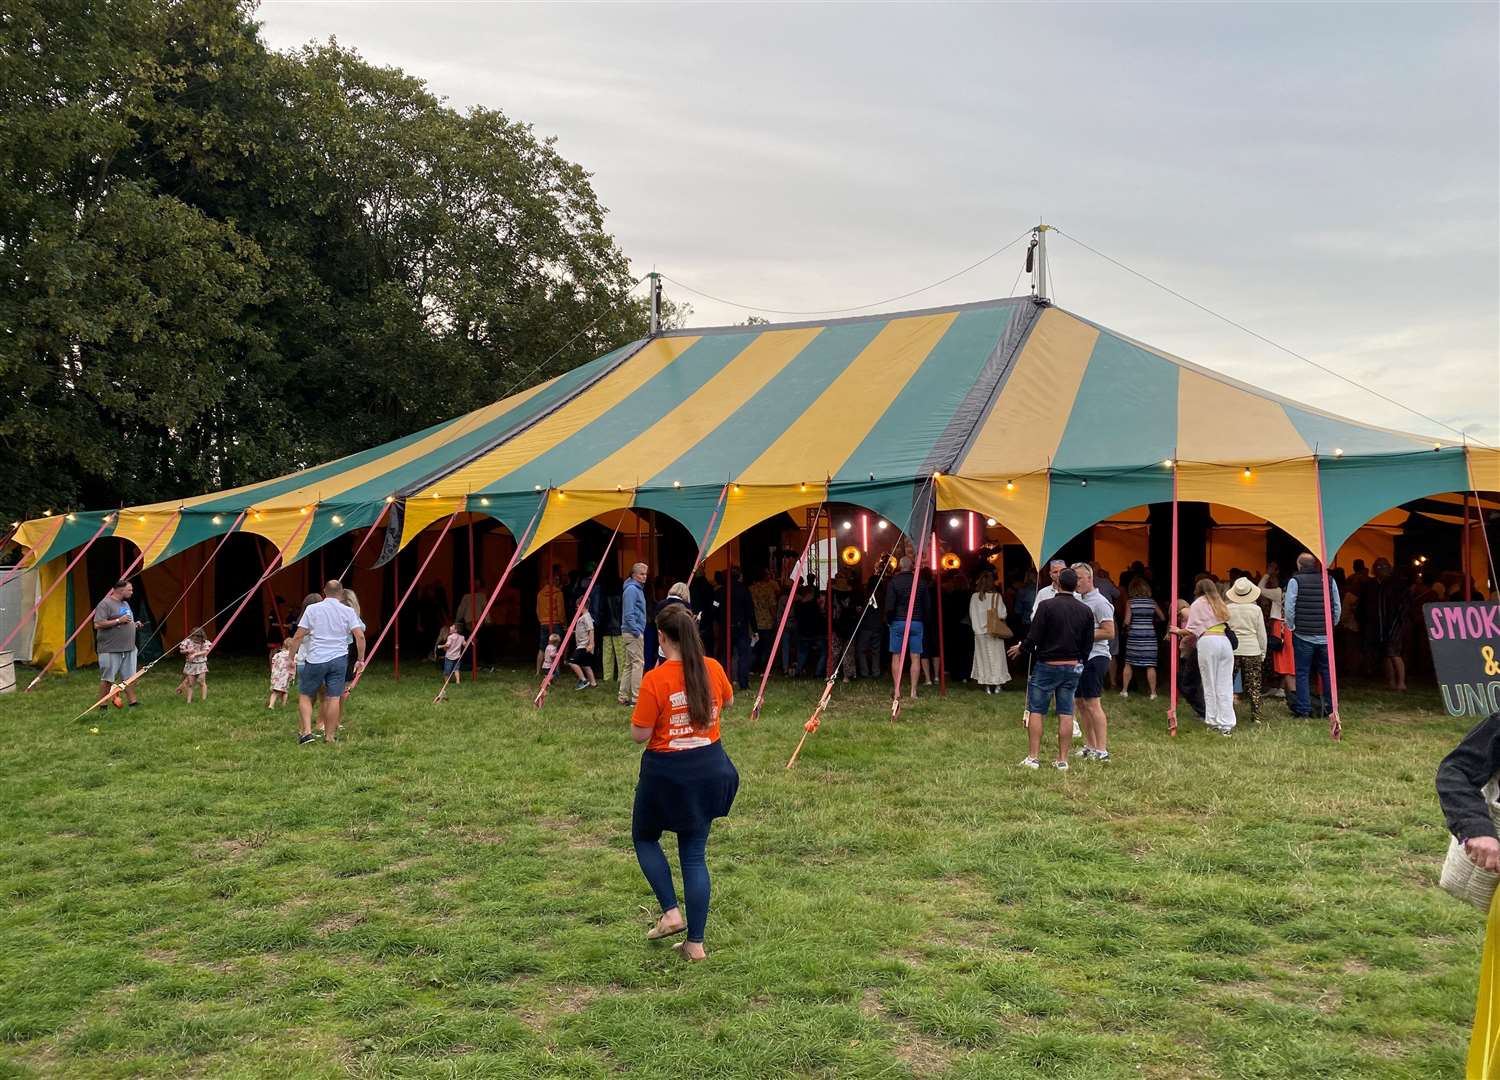 A large striped tent housed a secondary stage at the Smoked & Uncut Festival in Bridge, near Canterbury